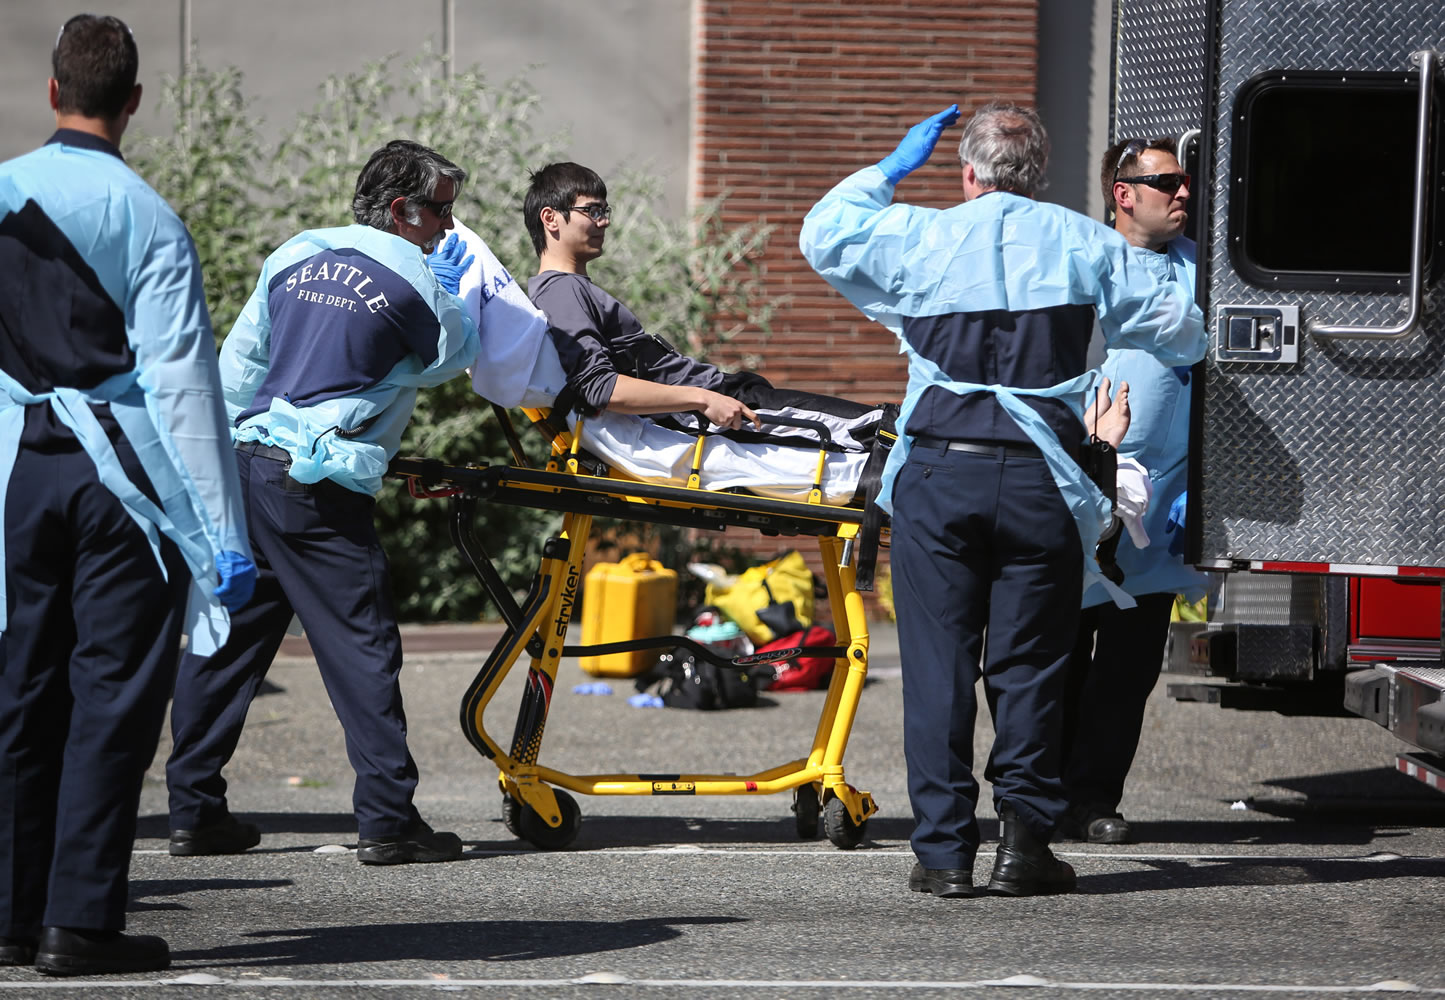 Jon Meis is taken from the scene by medics after a shooting at Seattle Pacific University on Thursday in Seattle. A 19-year-old man was fatally shot and two other young people were wounded after a gunman entered the foyer at Otto Miller Hall on the Seattle Pacific University campus and started shooting Thursday afternoon. When he paused to reload, a student building monitor disarmed him. Meis is the student monitor who is credited with stopping the suspected gunman, Aaron R.